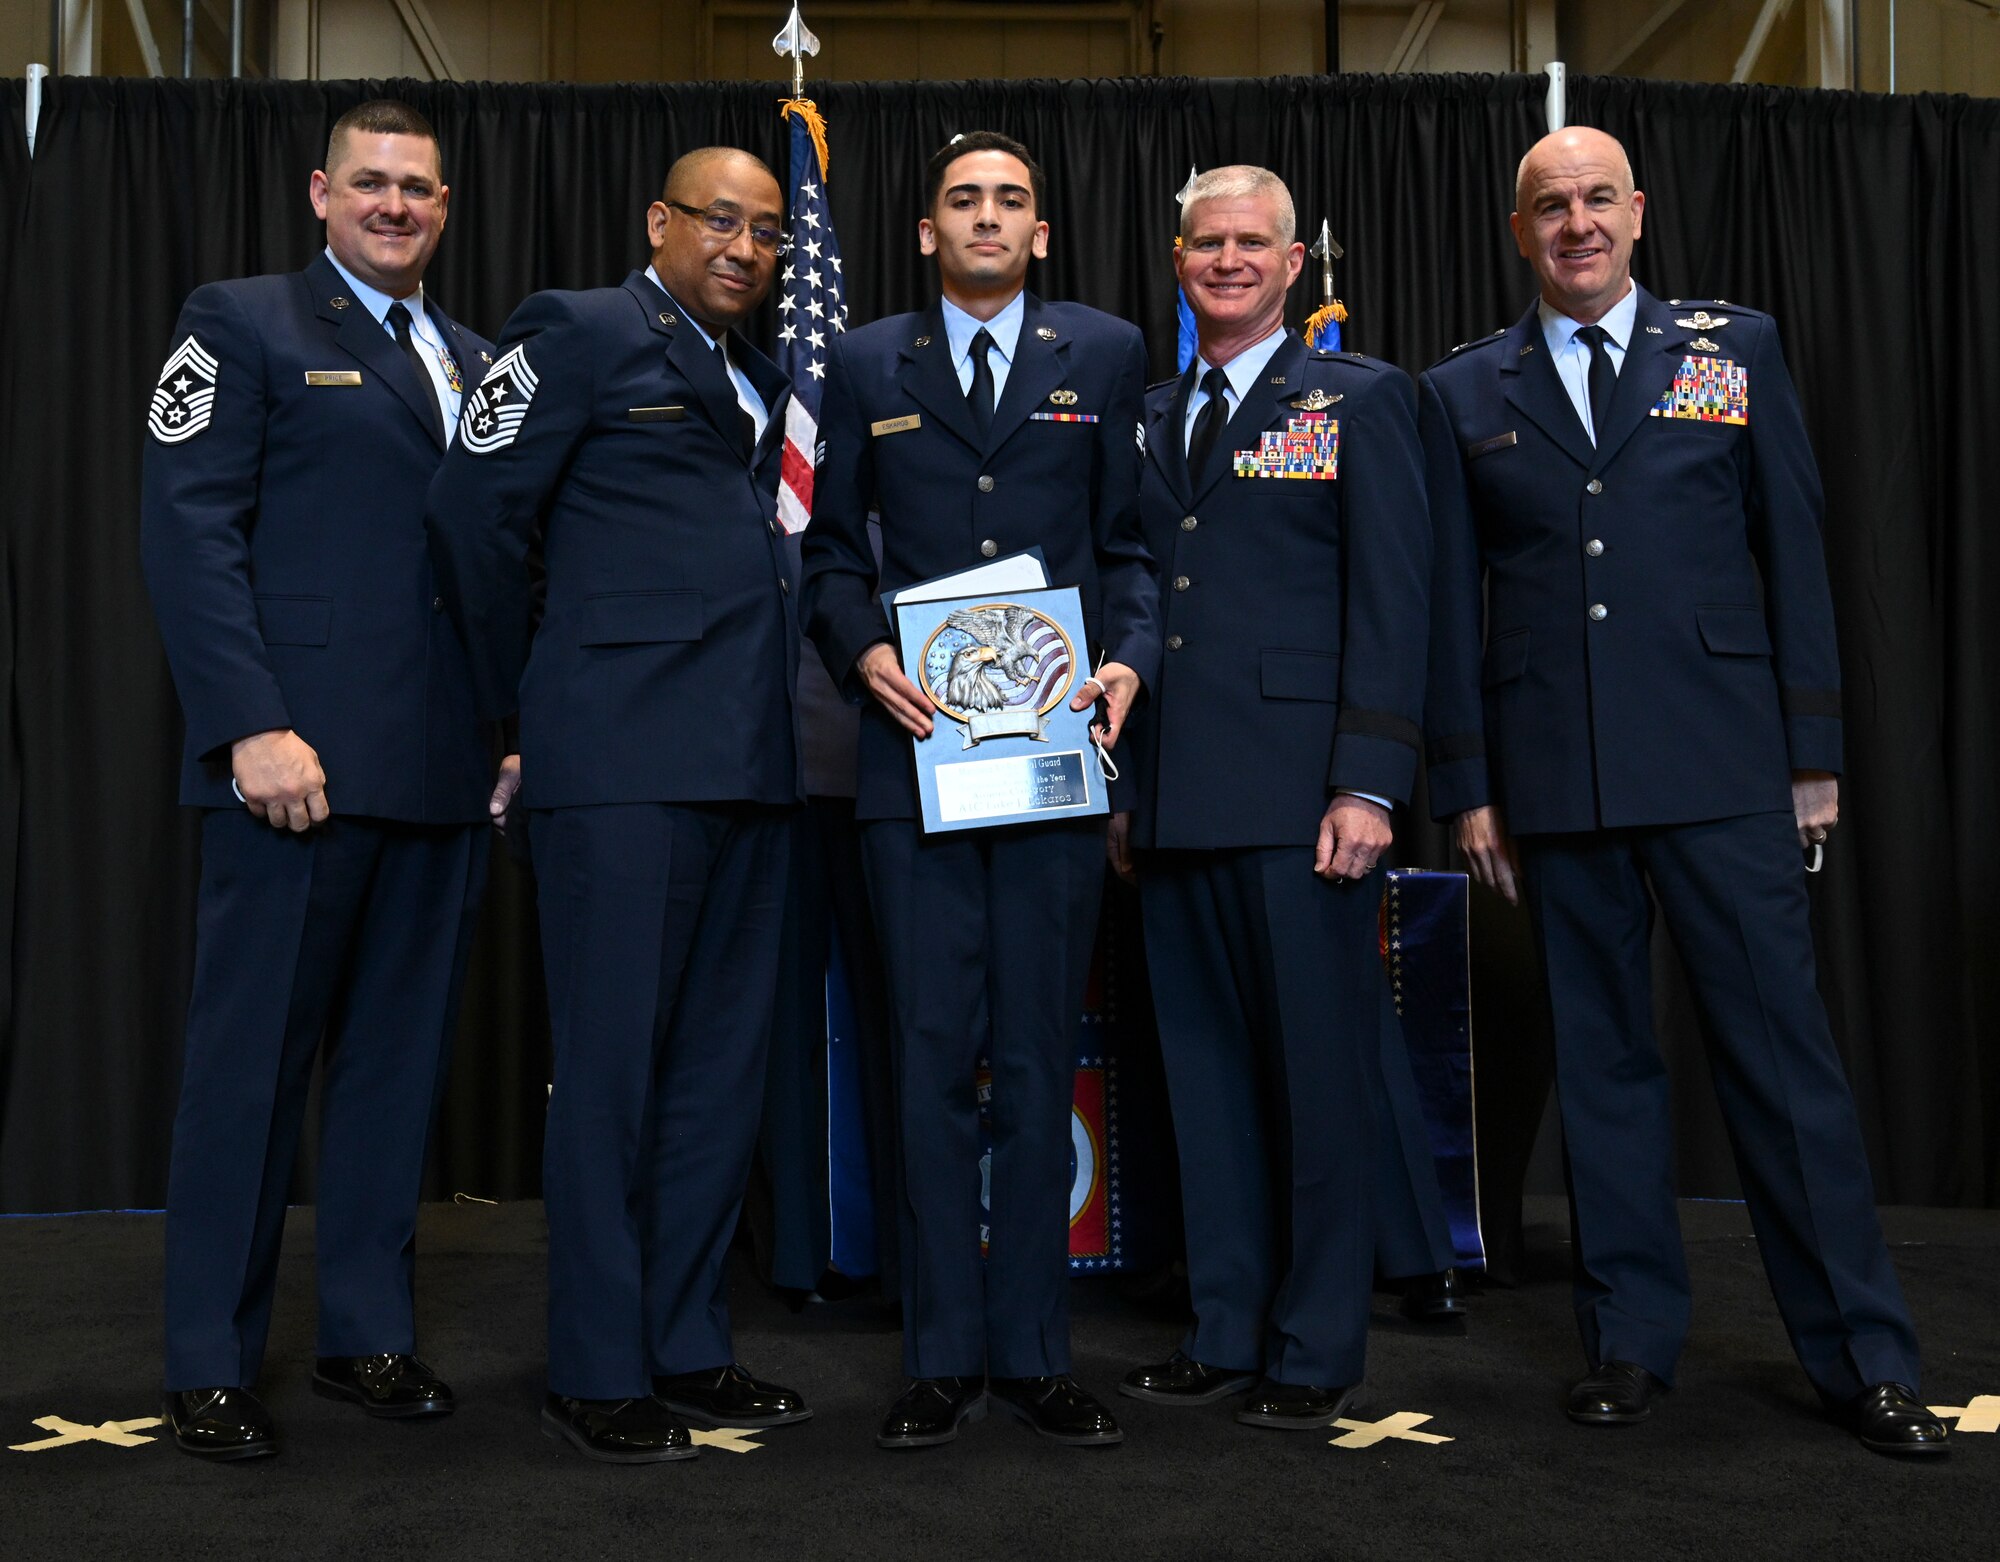 U.S. Air Force Tech. Sgt. Matthew Harbin, 175th Wing Noncommissioned officer of the Year, Maryland Air National Guard, receives a plaque at Warfield Air National Guard Base, Middle River, Md., during the 2021 Airman Recognition Ceremony. The yearly event pays tribute to the outstanding achievements of the Maryland Air National Guard and names the wing's outstanding Airman of the year. (U.S. Air National Guard photo by Amn Alexandra Huettner)